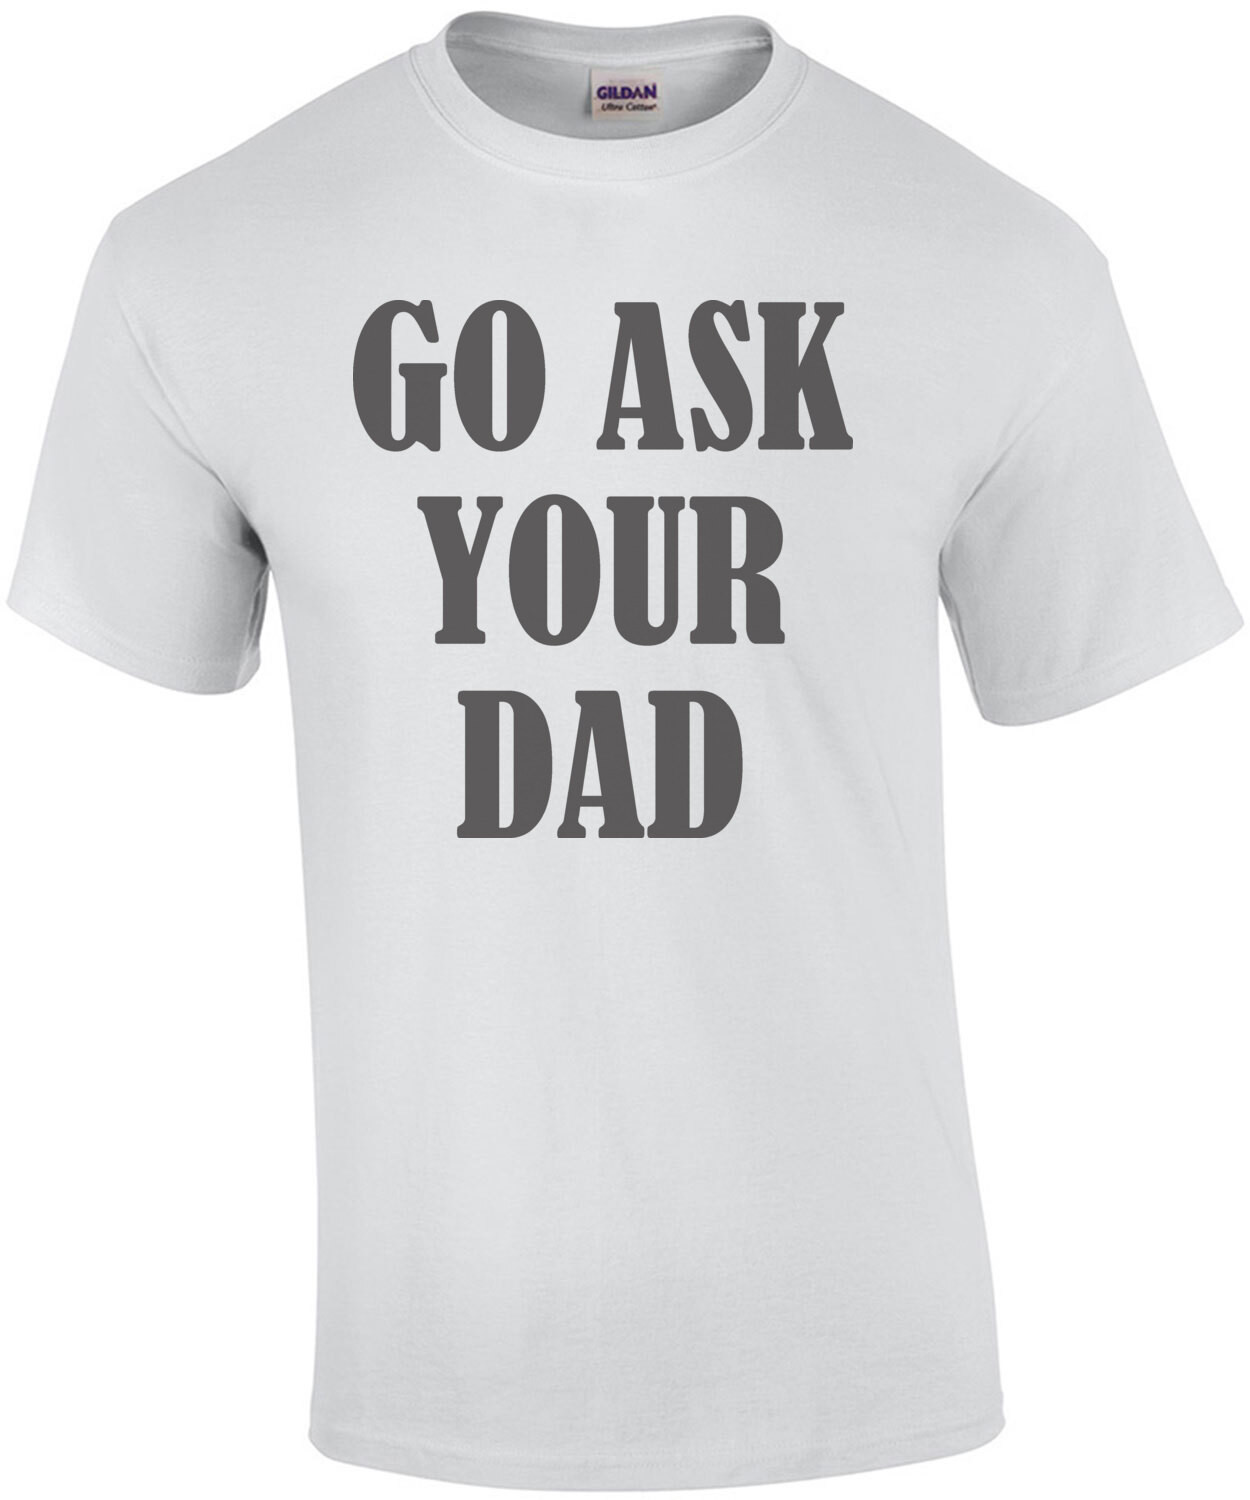 Go ask your Dad - funny parent t-shirt